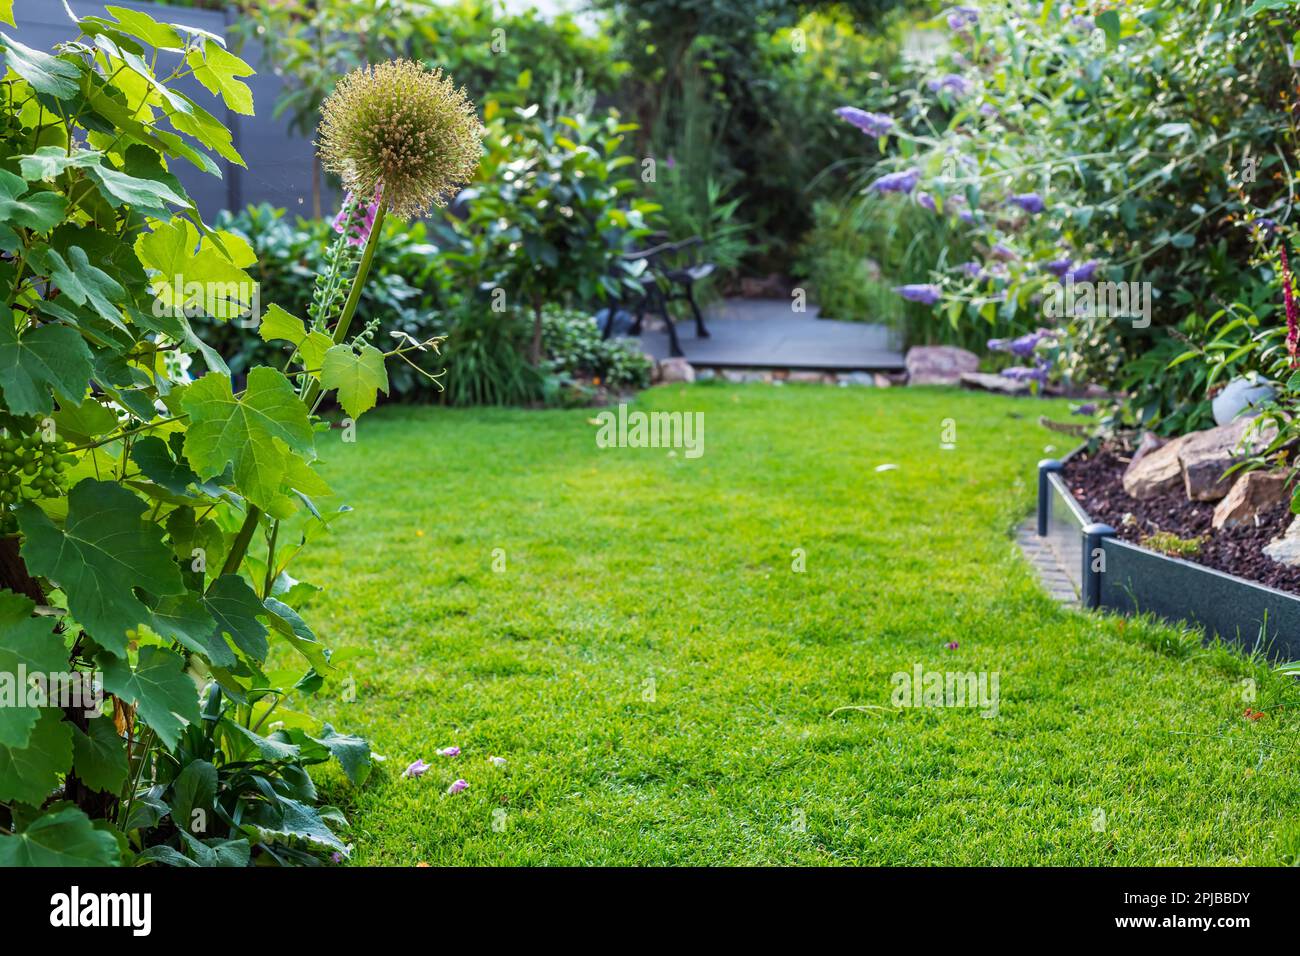 Landscape view of beautiful garden with freshly mowed lawn and flowerbed. Soft focus on foreground plants Stock Photo